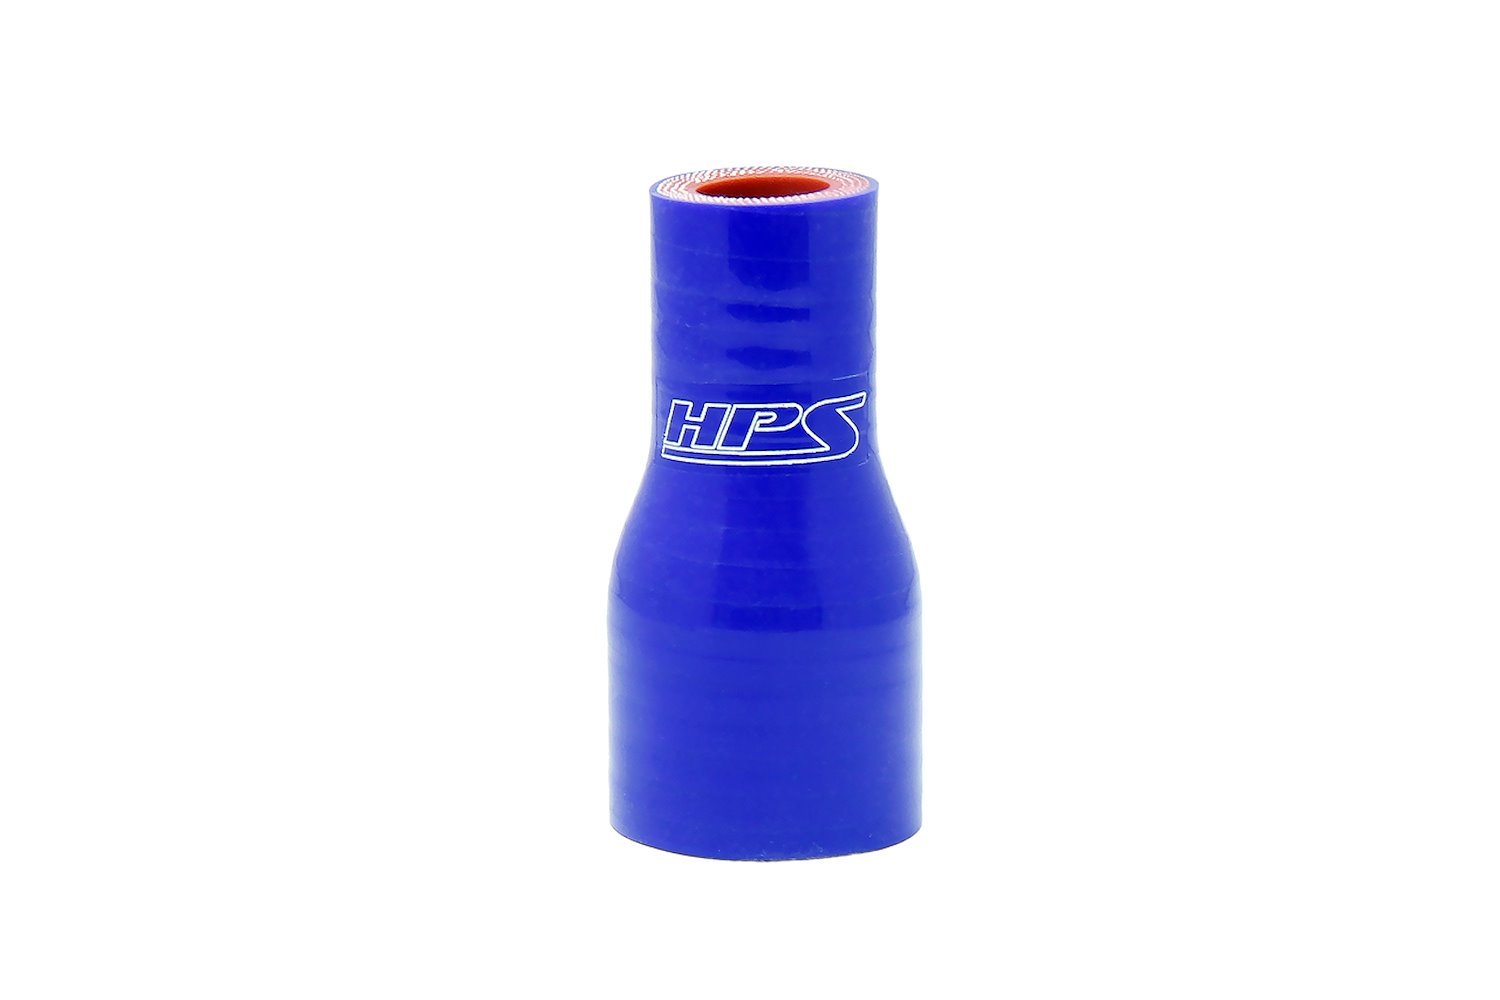 HTSR-062-087-BLUE Silicone Reducer Hose, High-Temp 4-Ply Reinforced, 5/8 in. - 7/8 in. ID, 3 in. Long, Blue